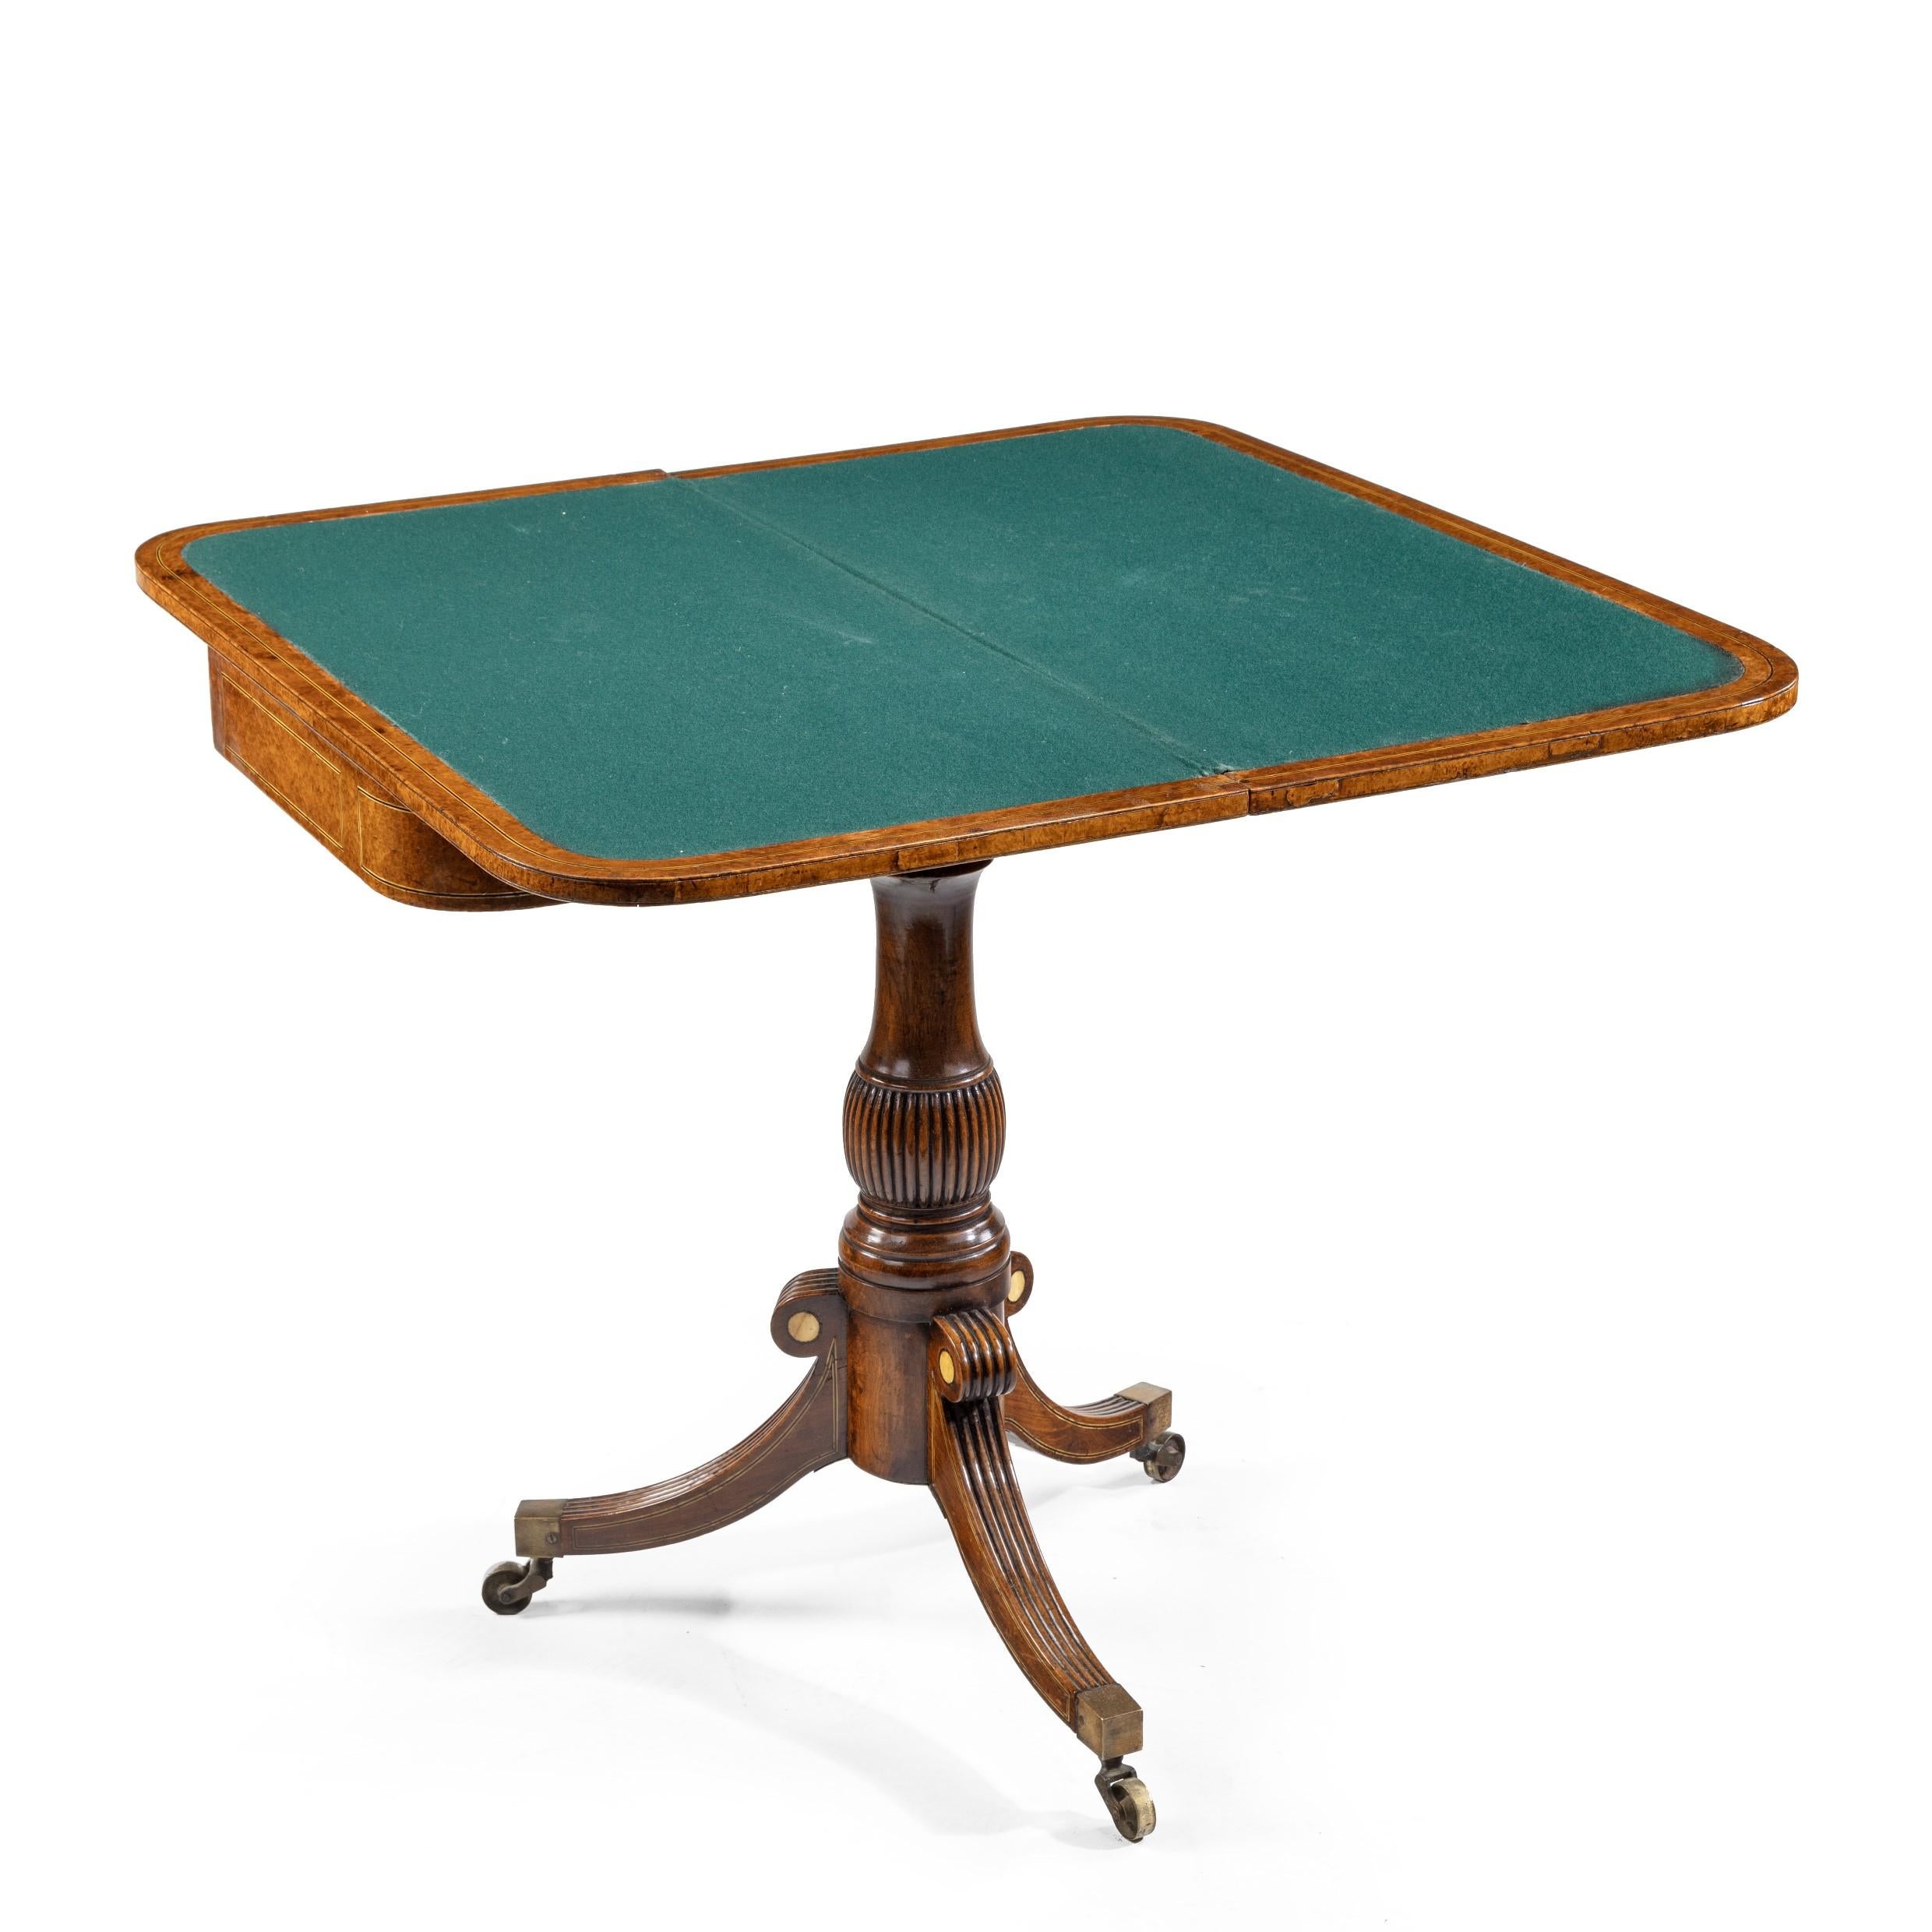 A George IV Anglo-Chinese amboyna card table, the hinged rectangular top with rounded corners opening out to form a square, lined in later green baize, decorated with bone and ebony strung panels, raised on a solid rosewood gadrooned and turned